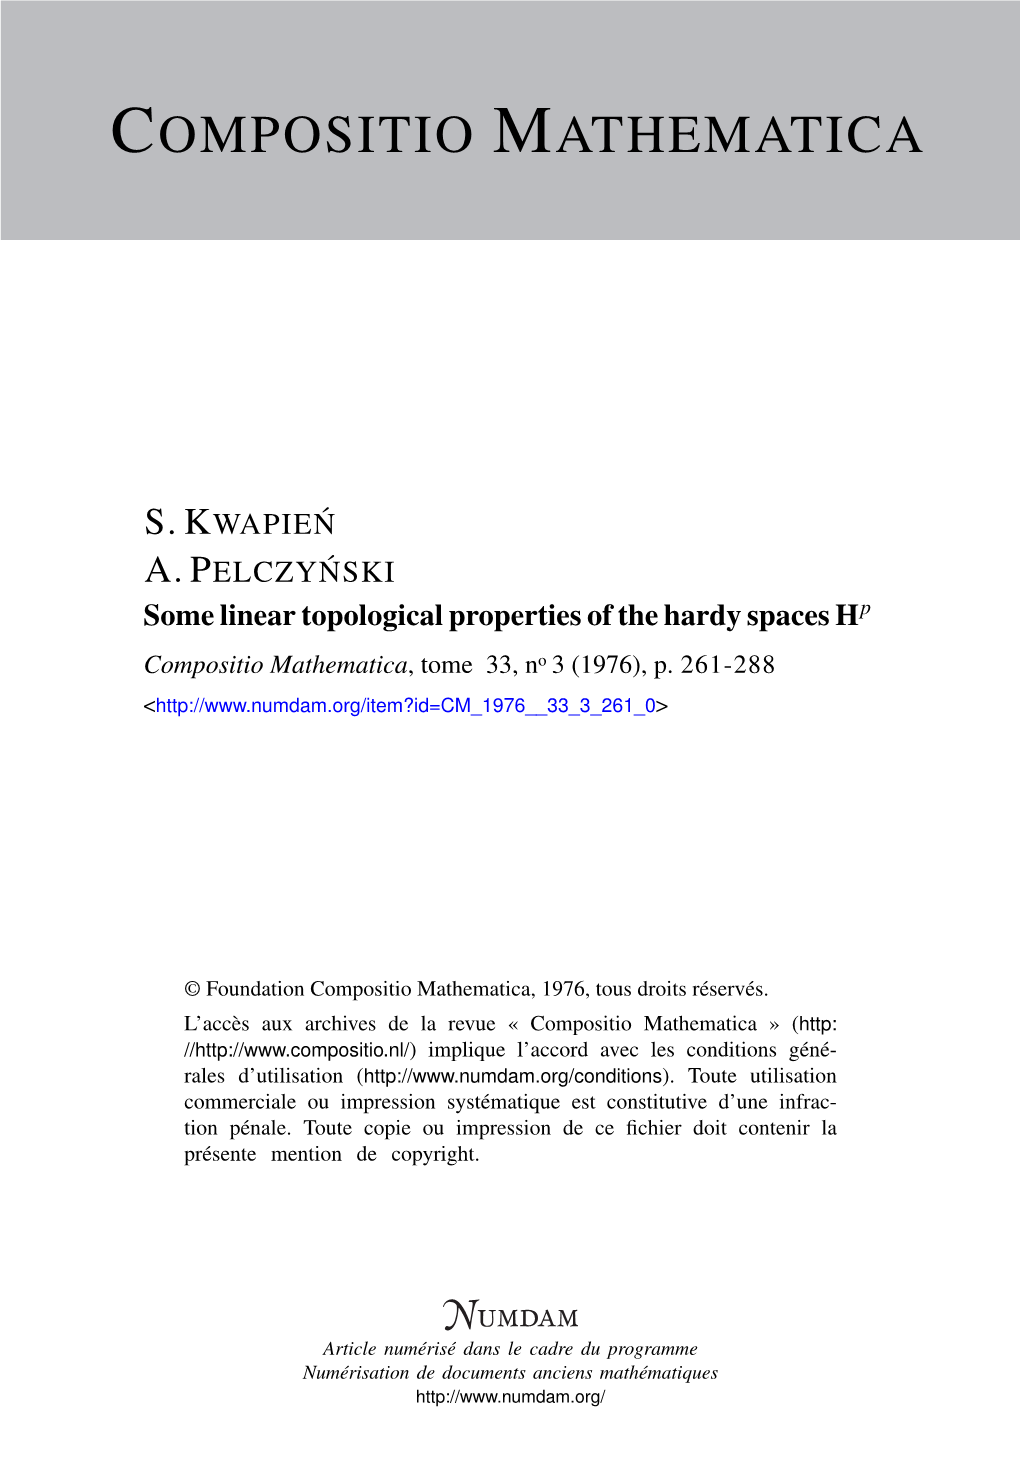 Some Linear Topological Properties of the Hardy Spaces Hp Compositio Mathematica, Tome 33, No 3 (1976), P